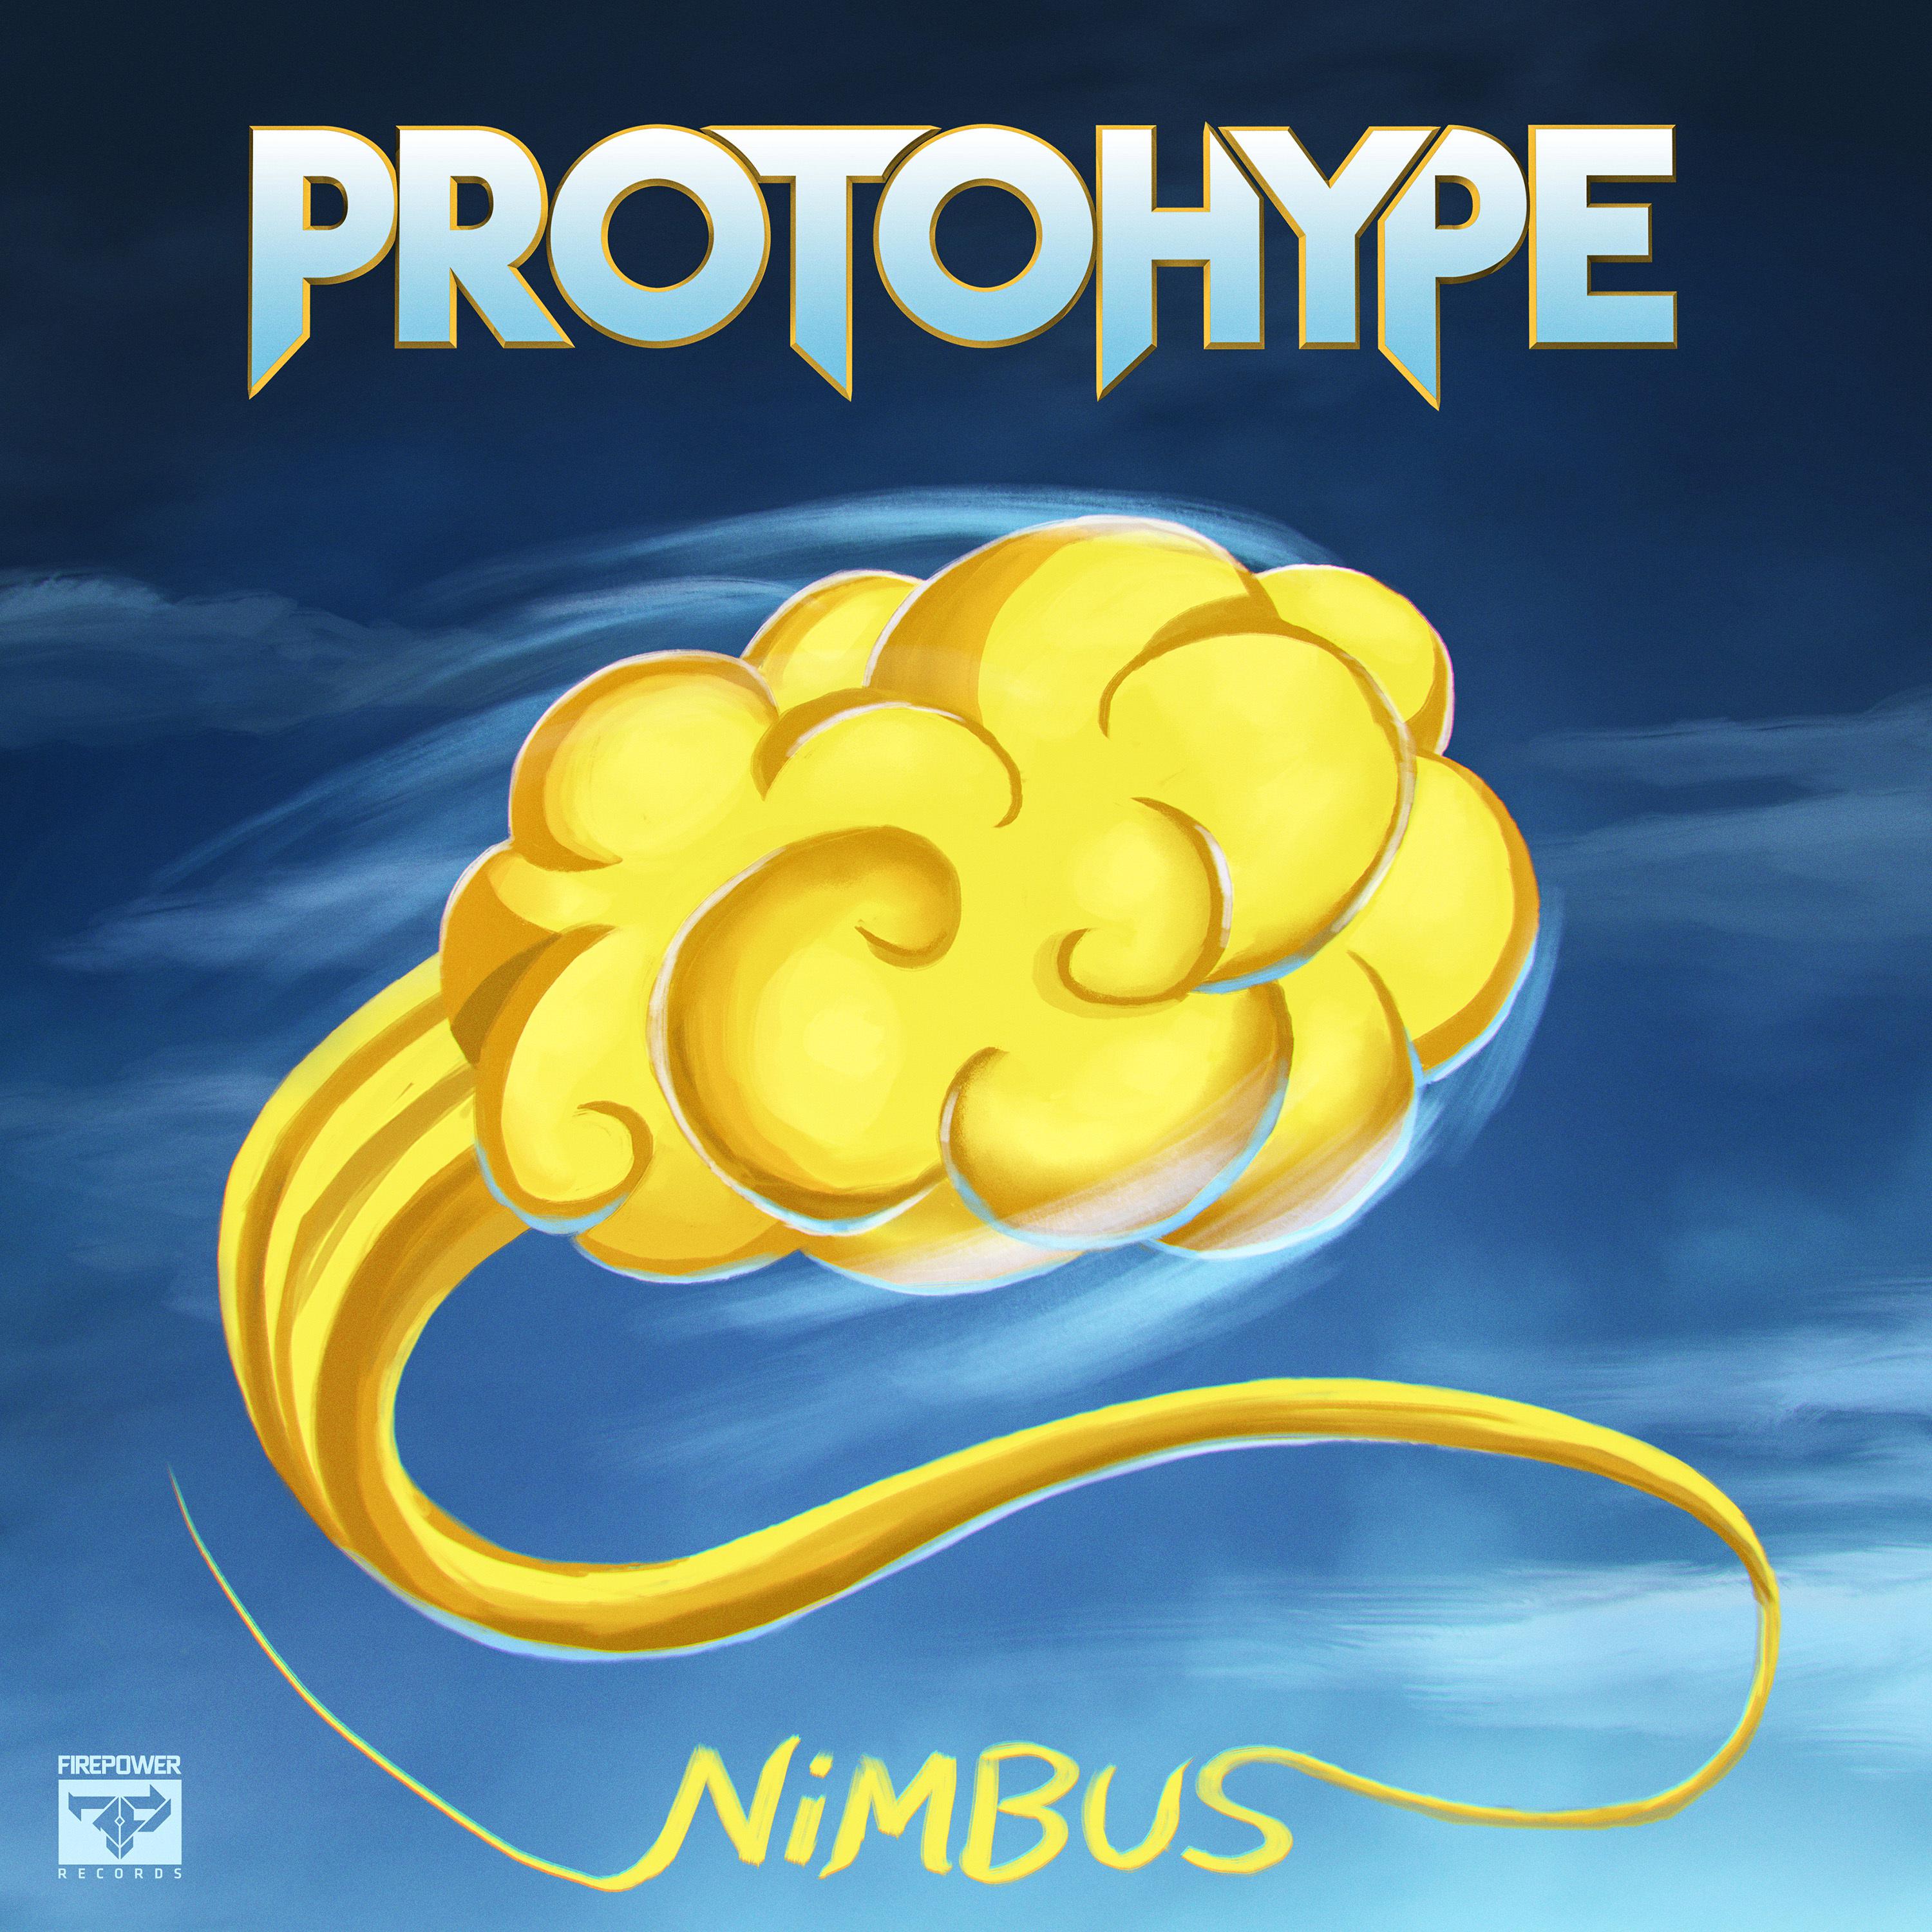 Protohype - Power Up!